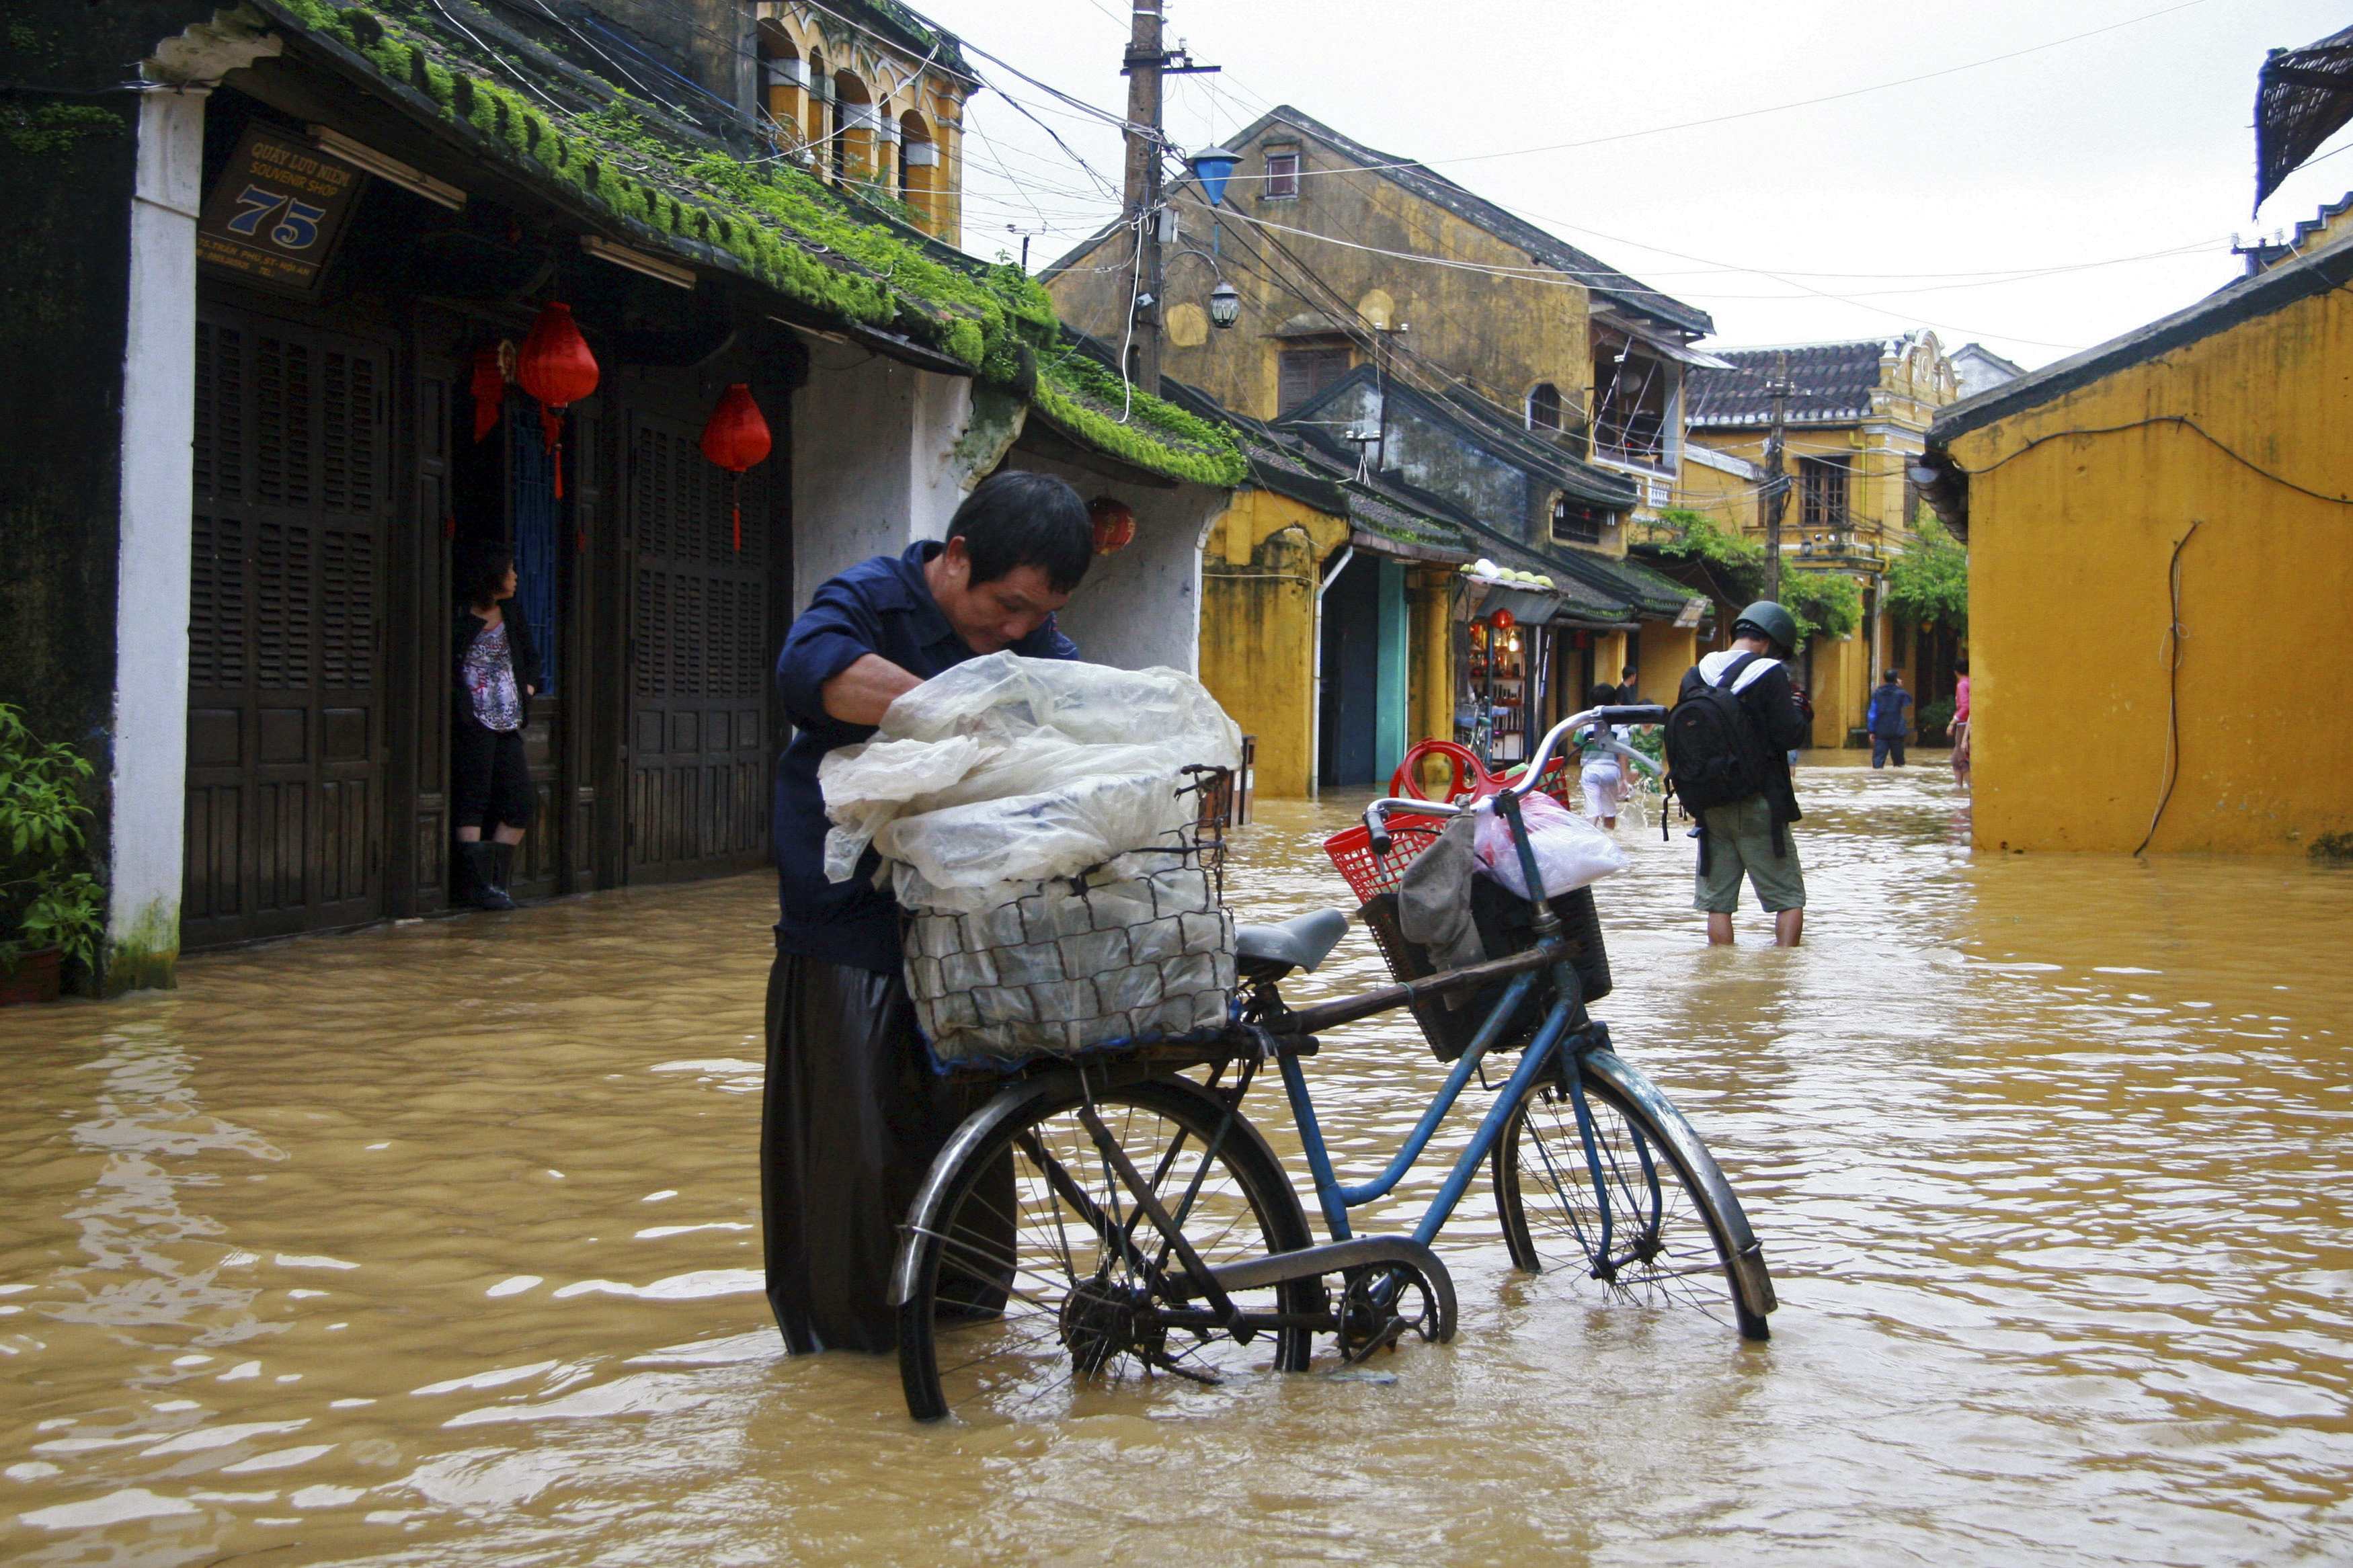 Flooded street in Vietnam's central town of Hoi An. Photo: Reuters